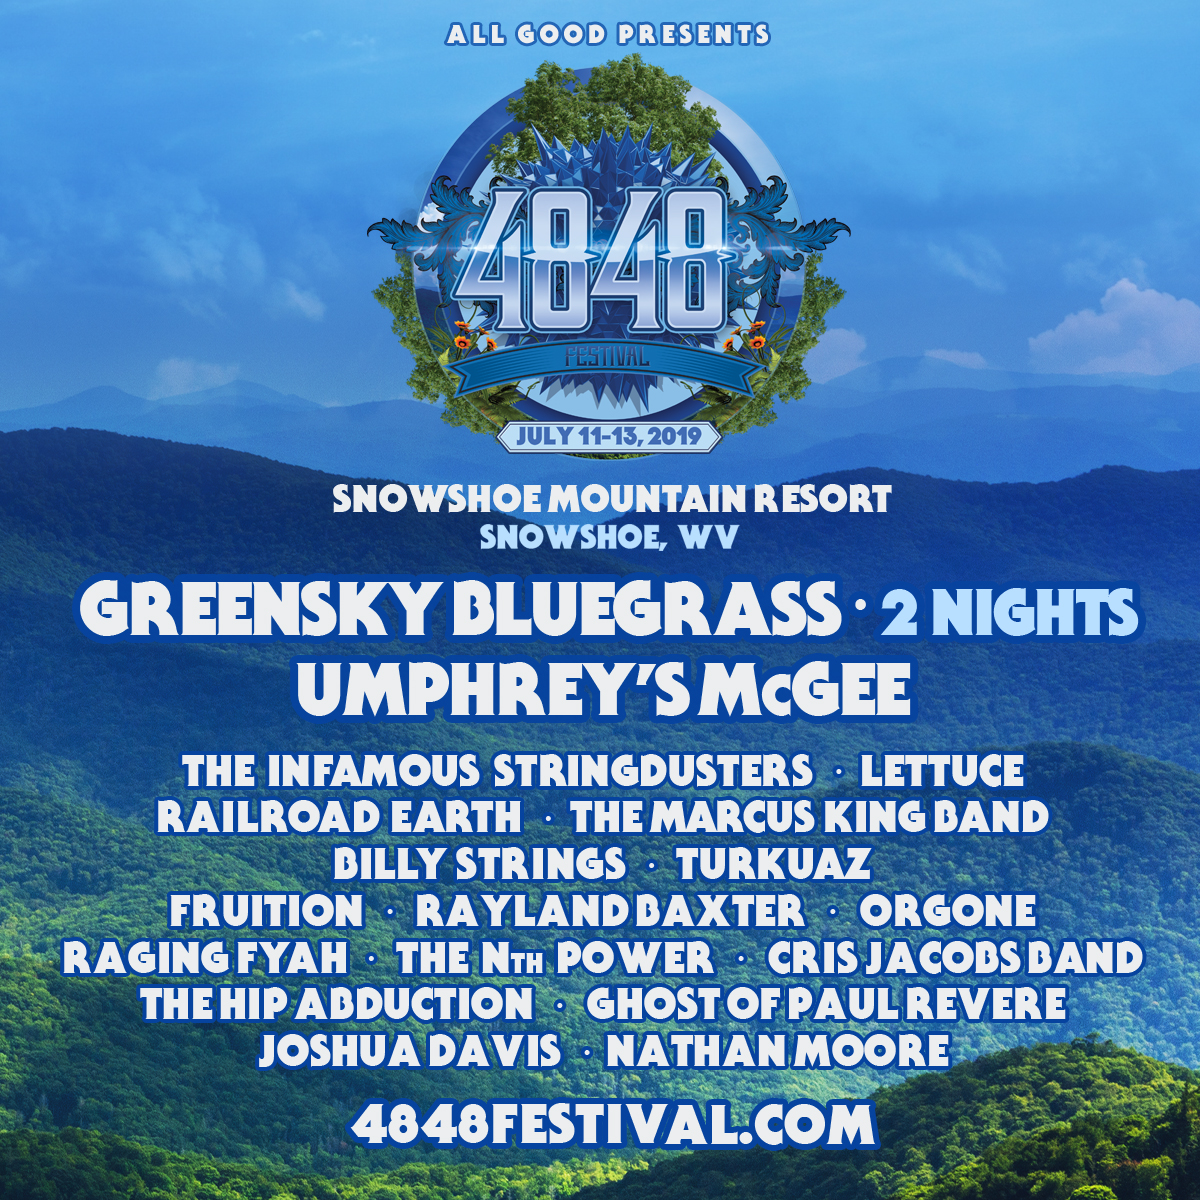 All Good Presents the Inaugural 4848 Festival at Snowshoe Mountain July 11 – 13